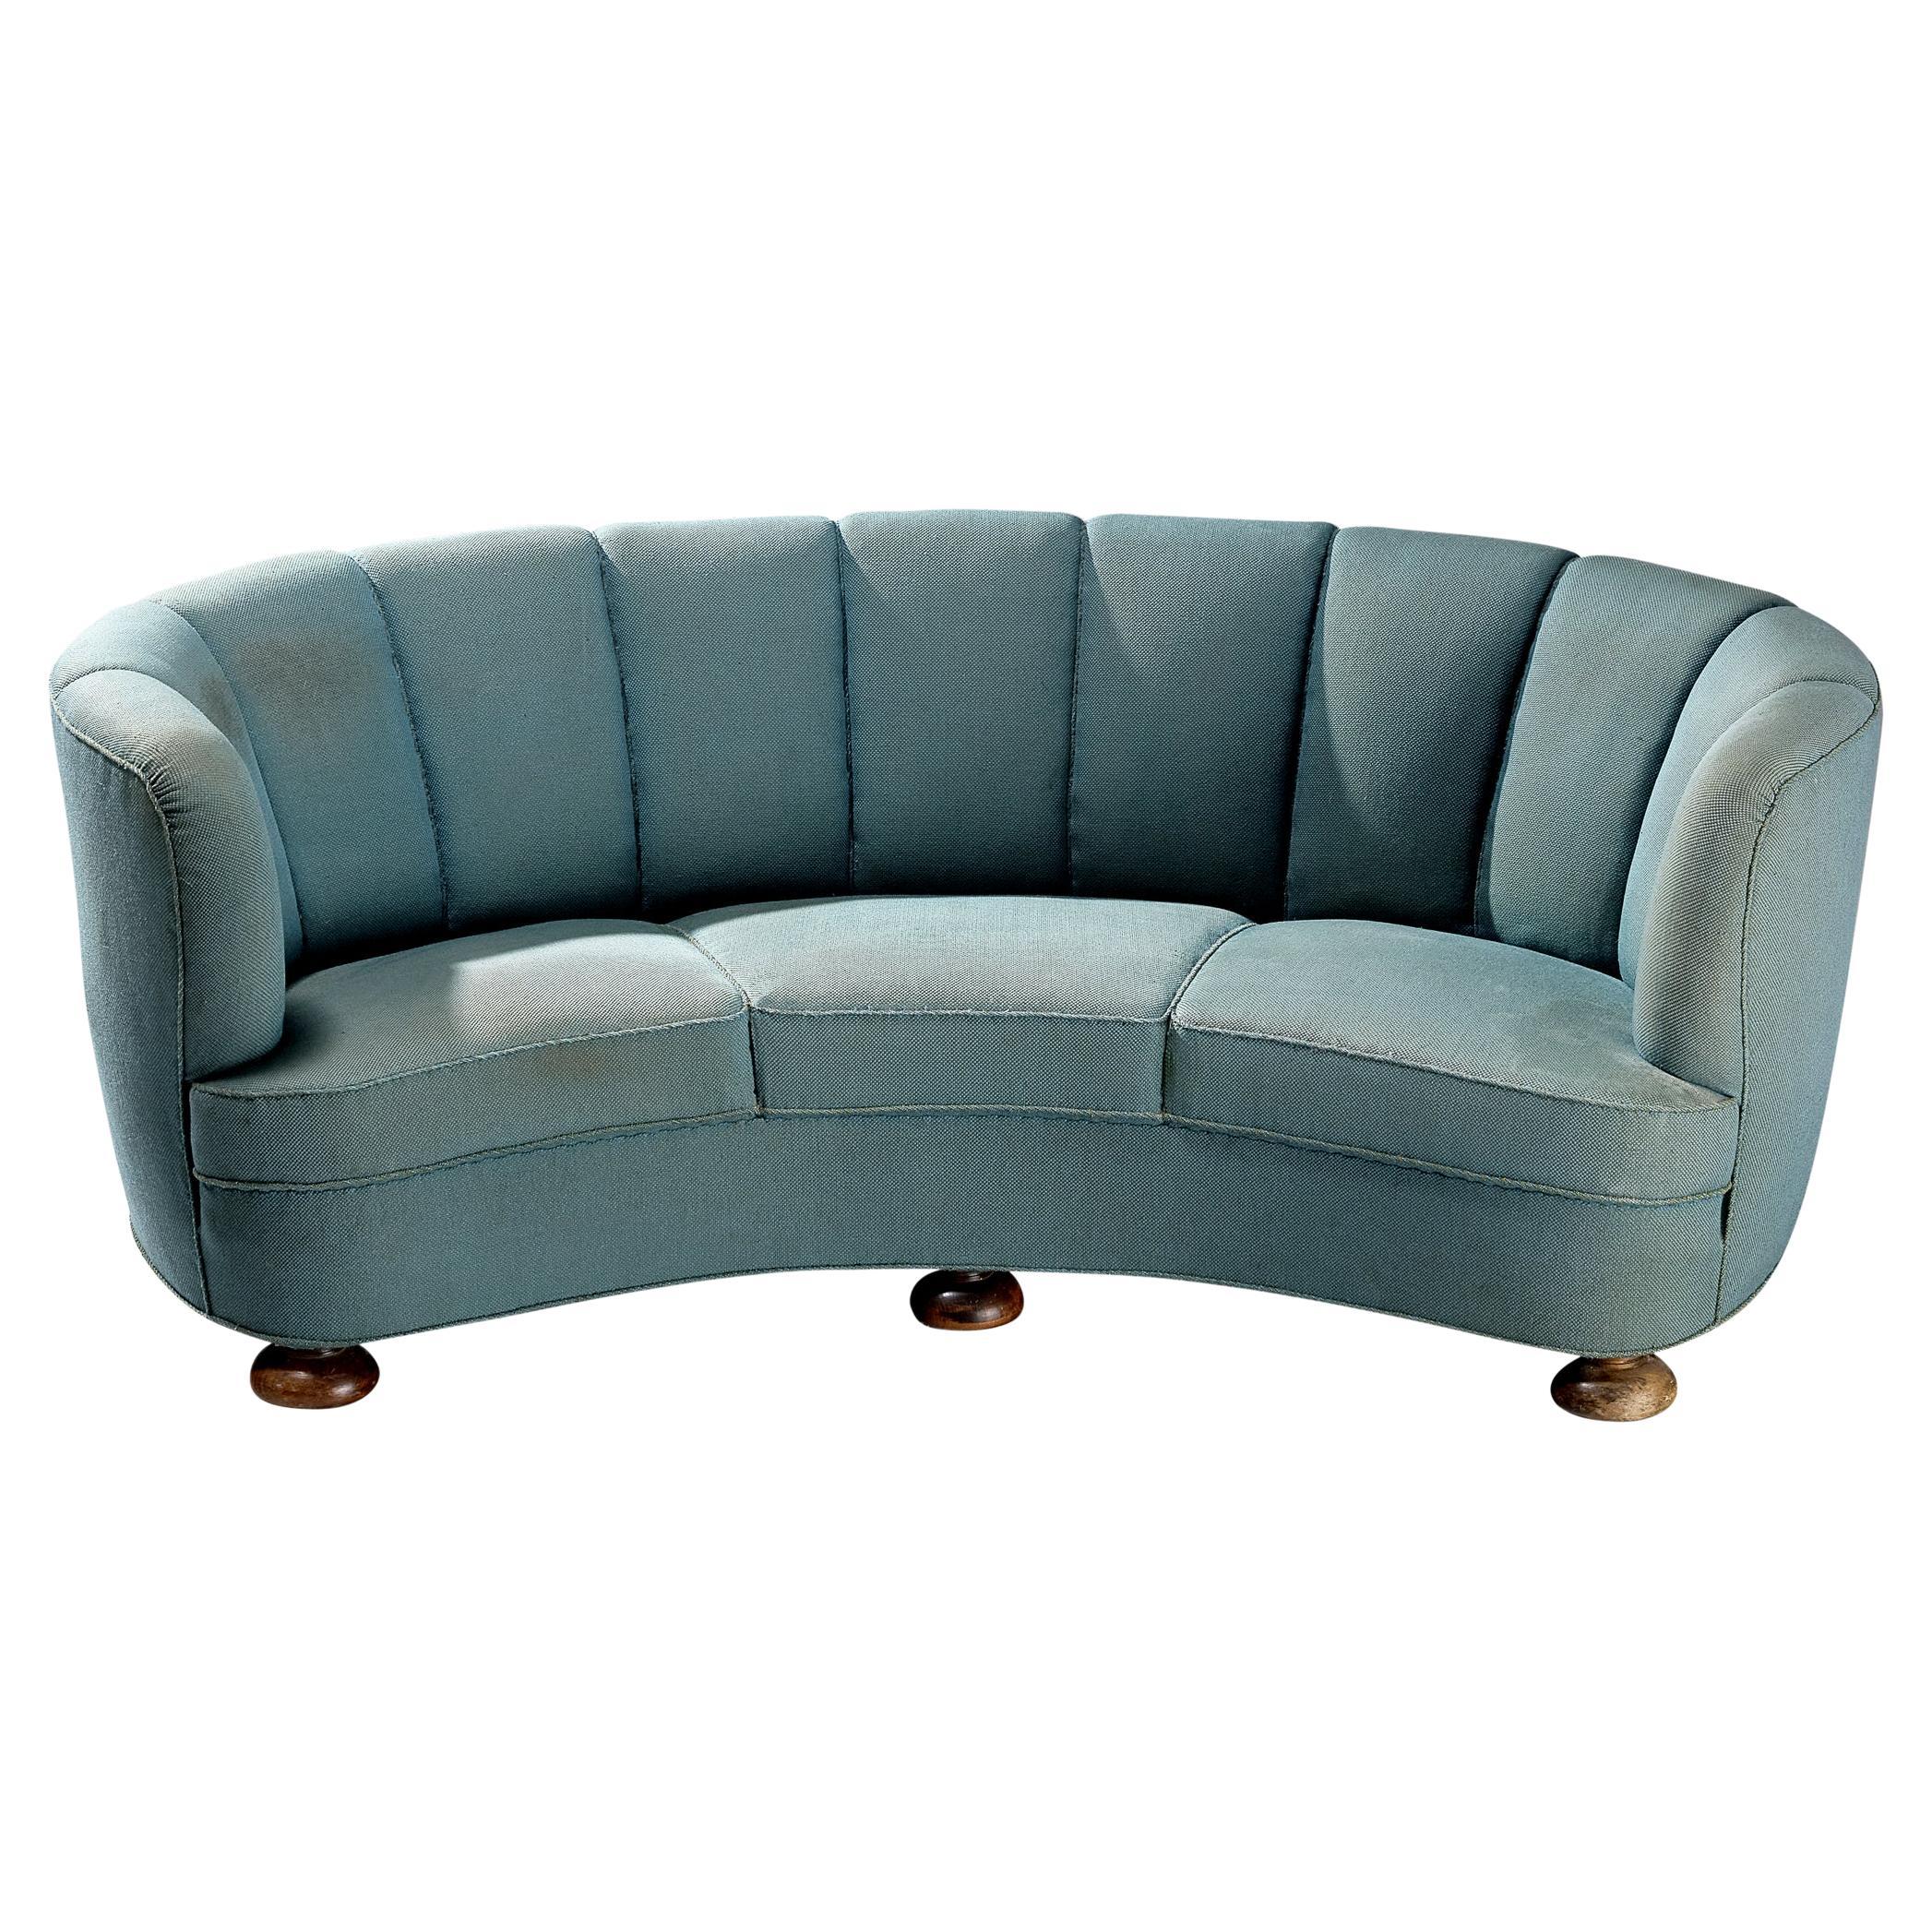 Danish Banana Sofa in Turquoise Upholstery For Sale at 1stDibs